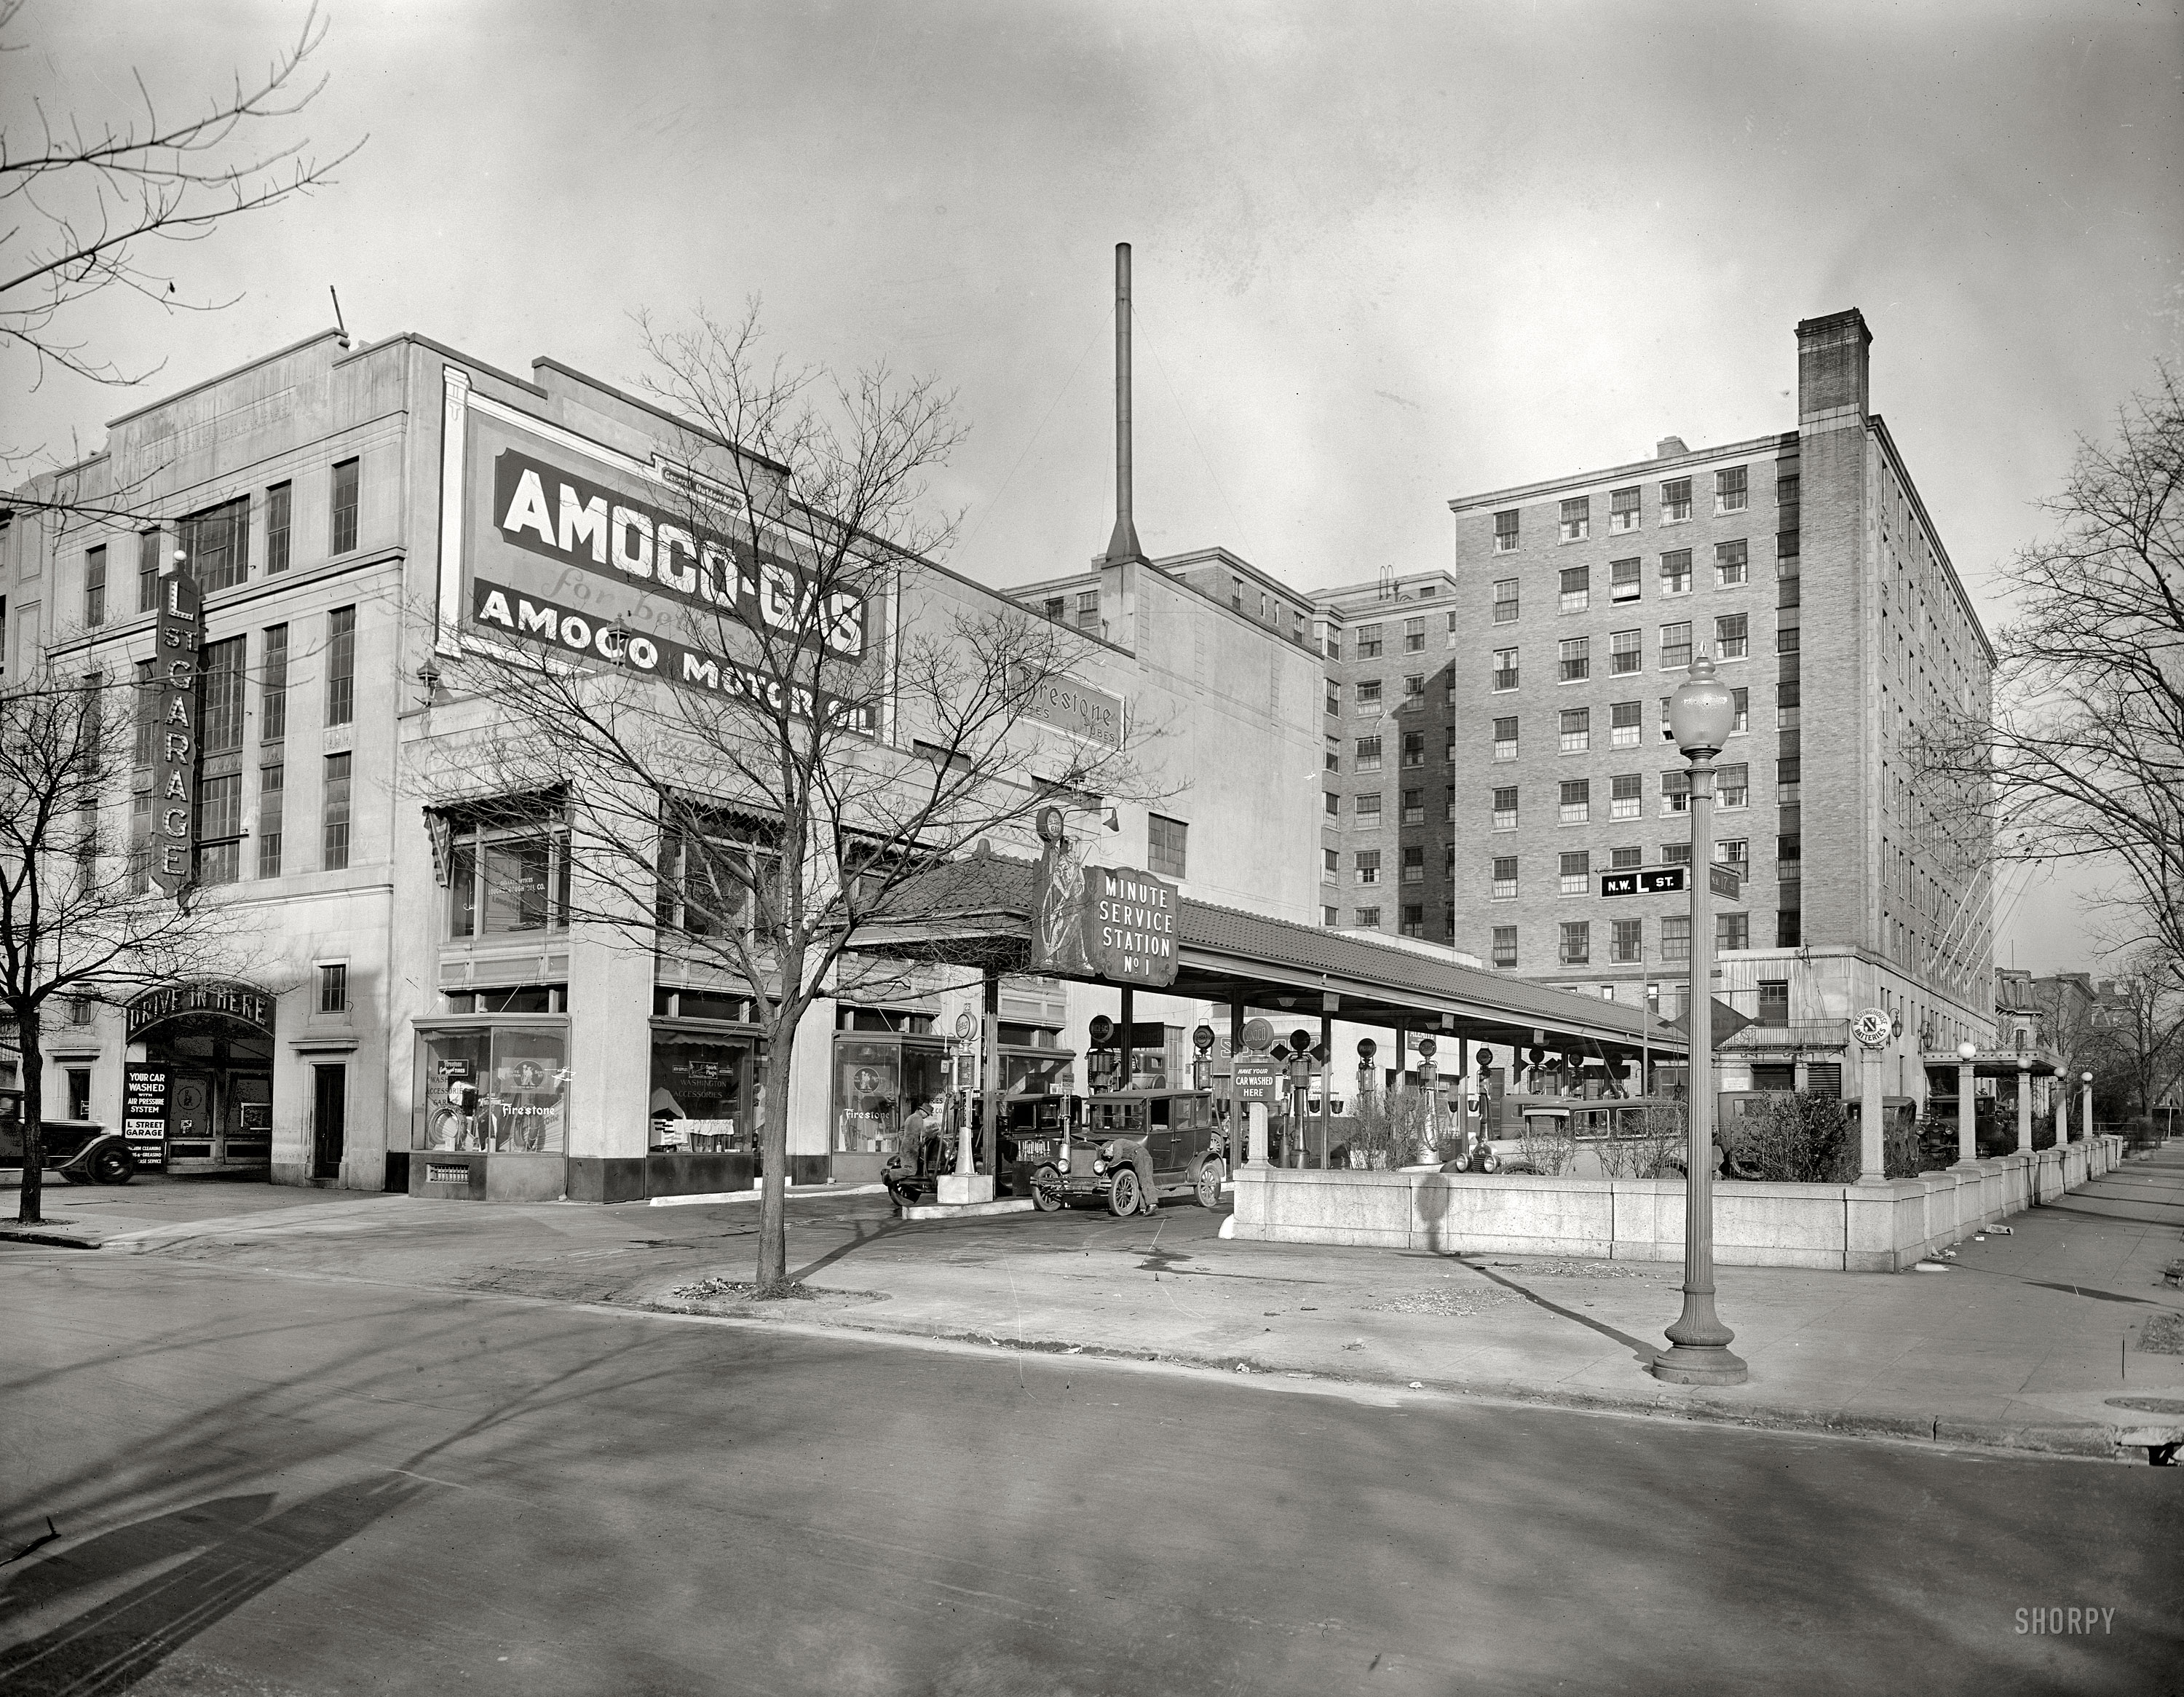 Washington, D.C., circa 1928. "Washington Accessories store, L Street N.W." The service station we saw last year in this view from 1925, before the streetlamp sprouted on the sidewalk. National Photo Co. glass negative. View full size.